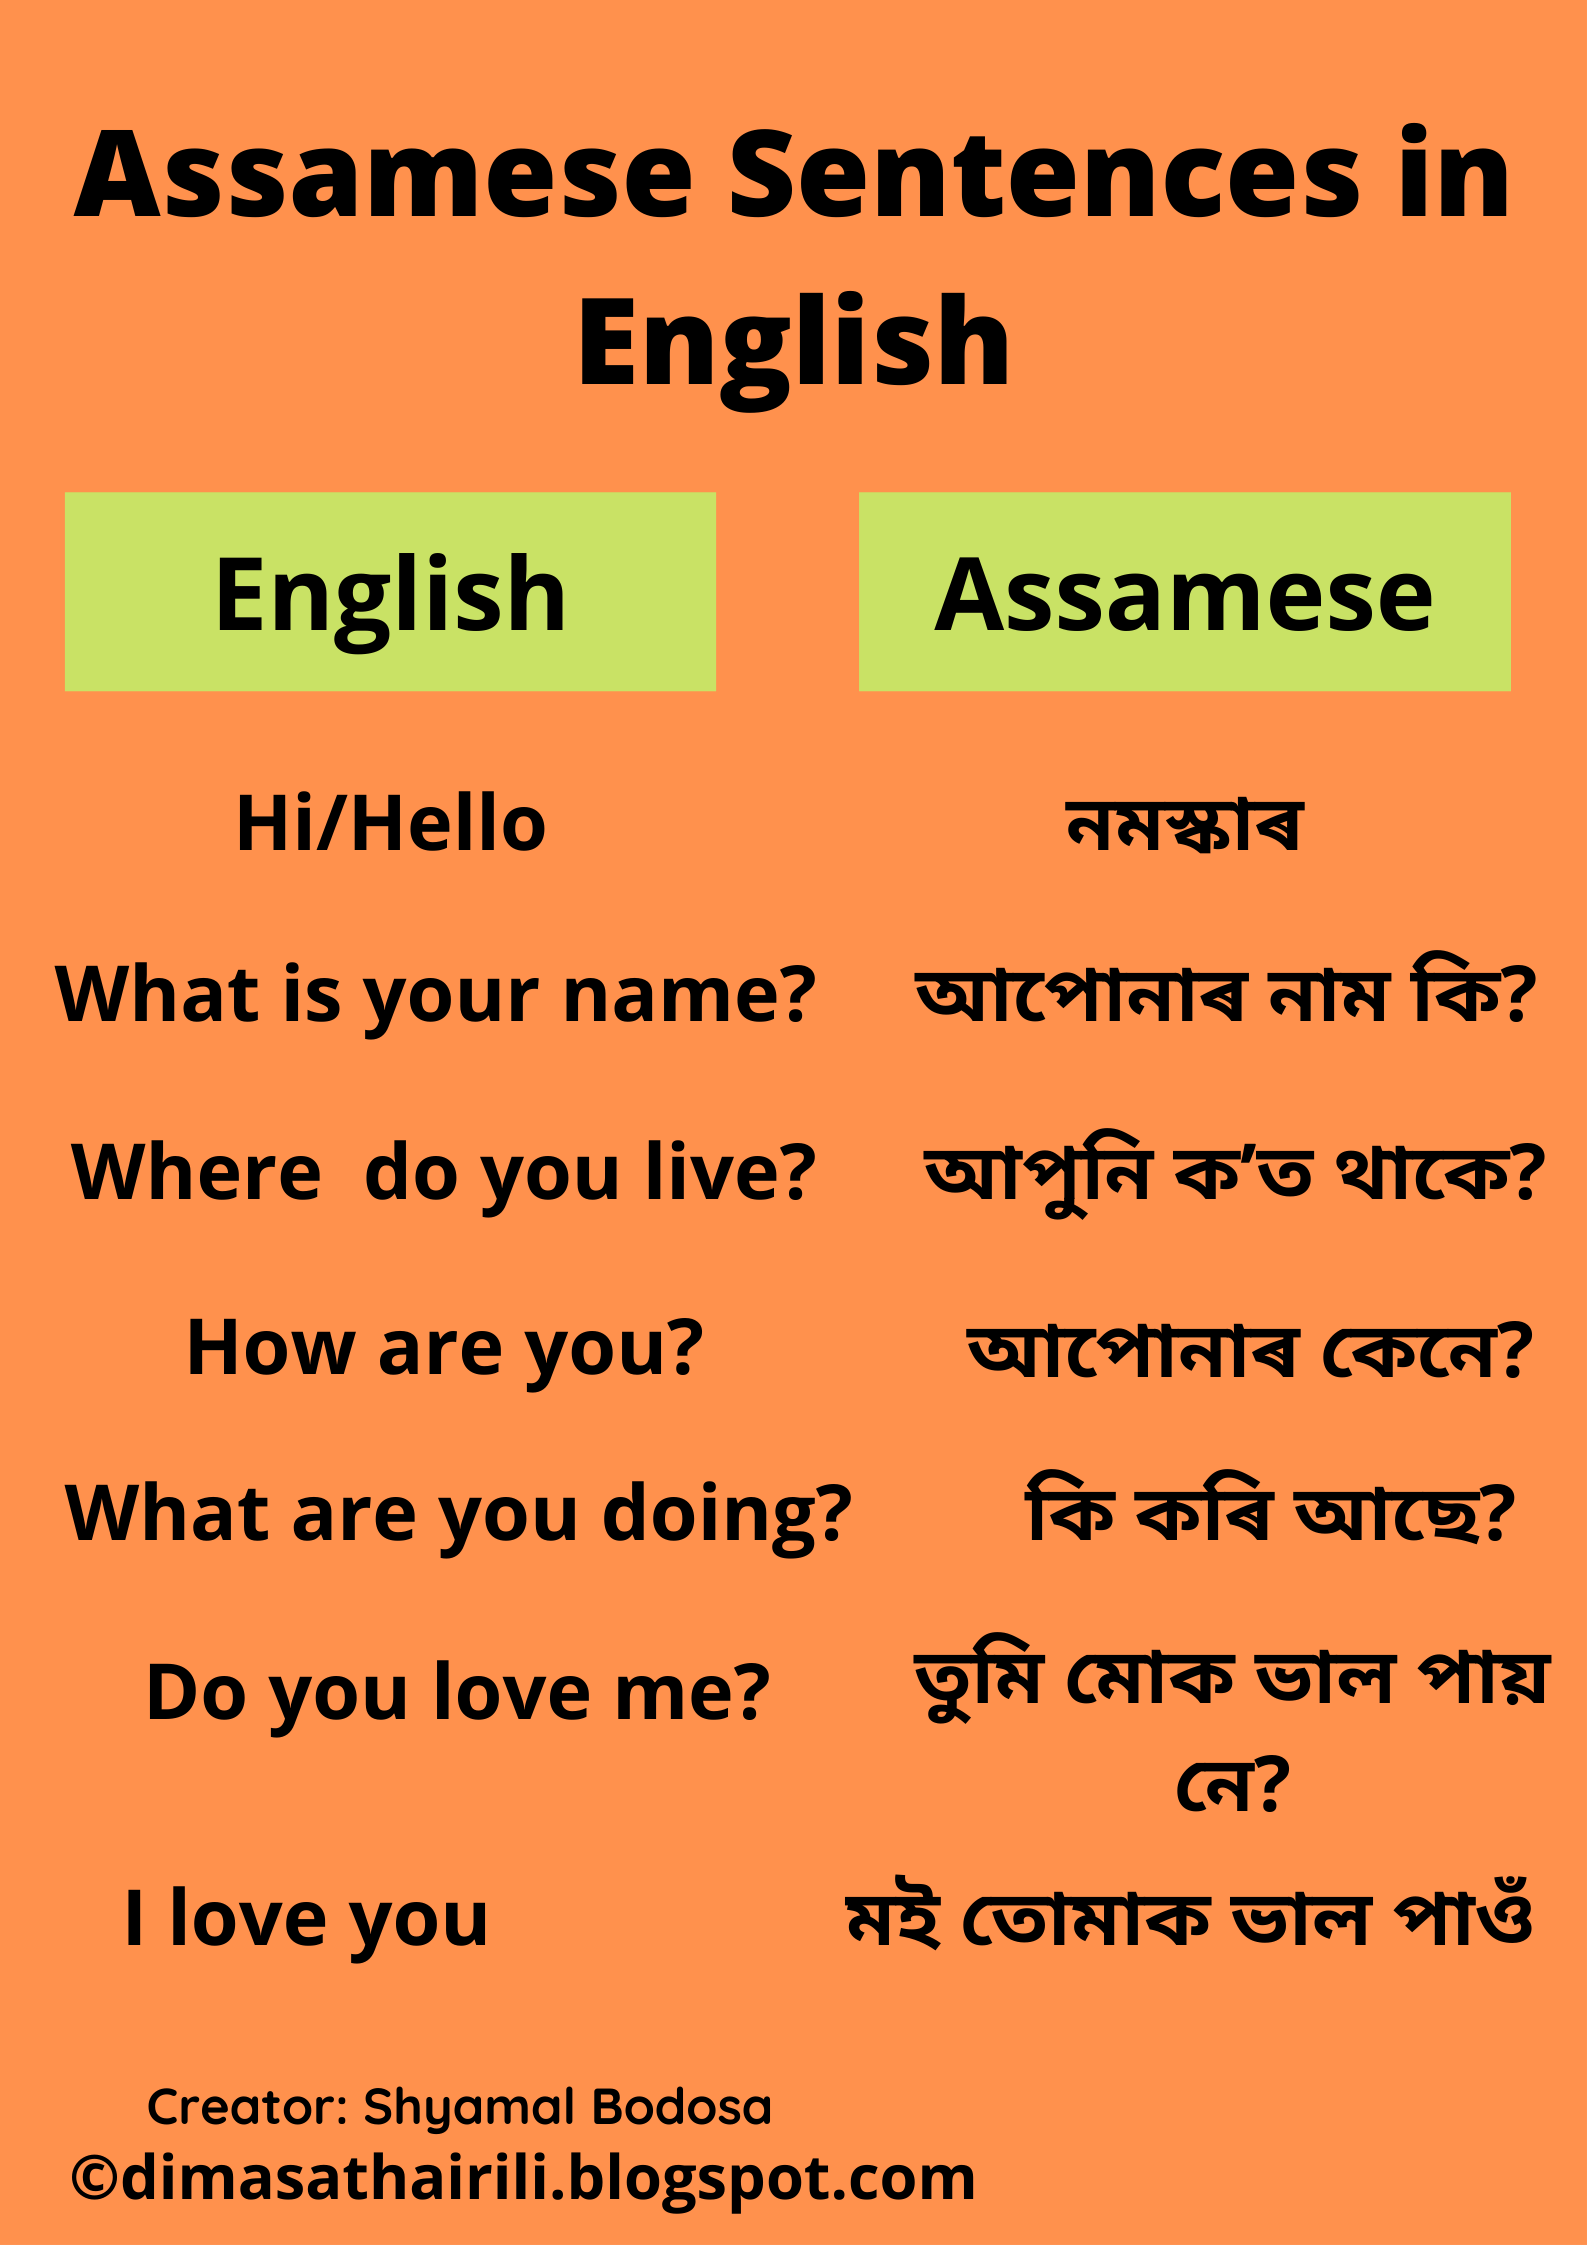 hypothesis meaning in assamese